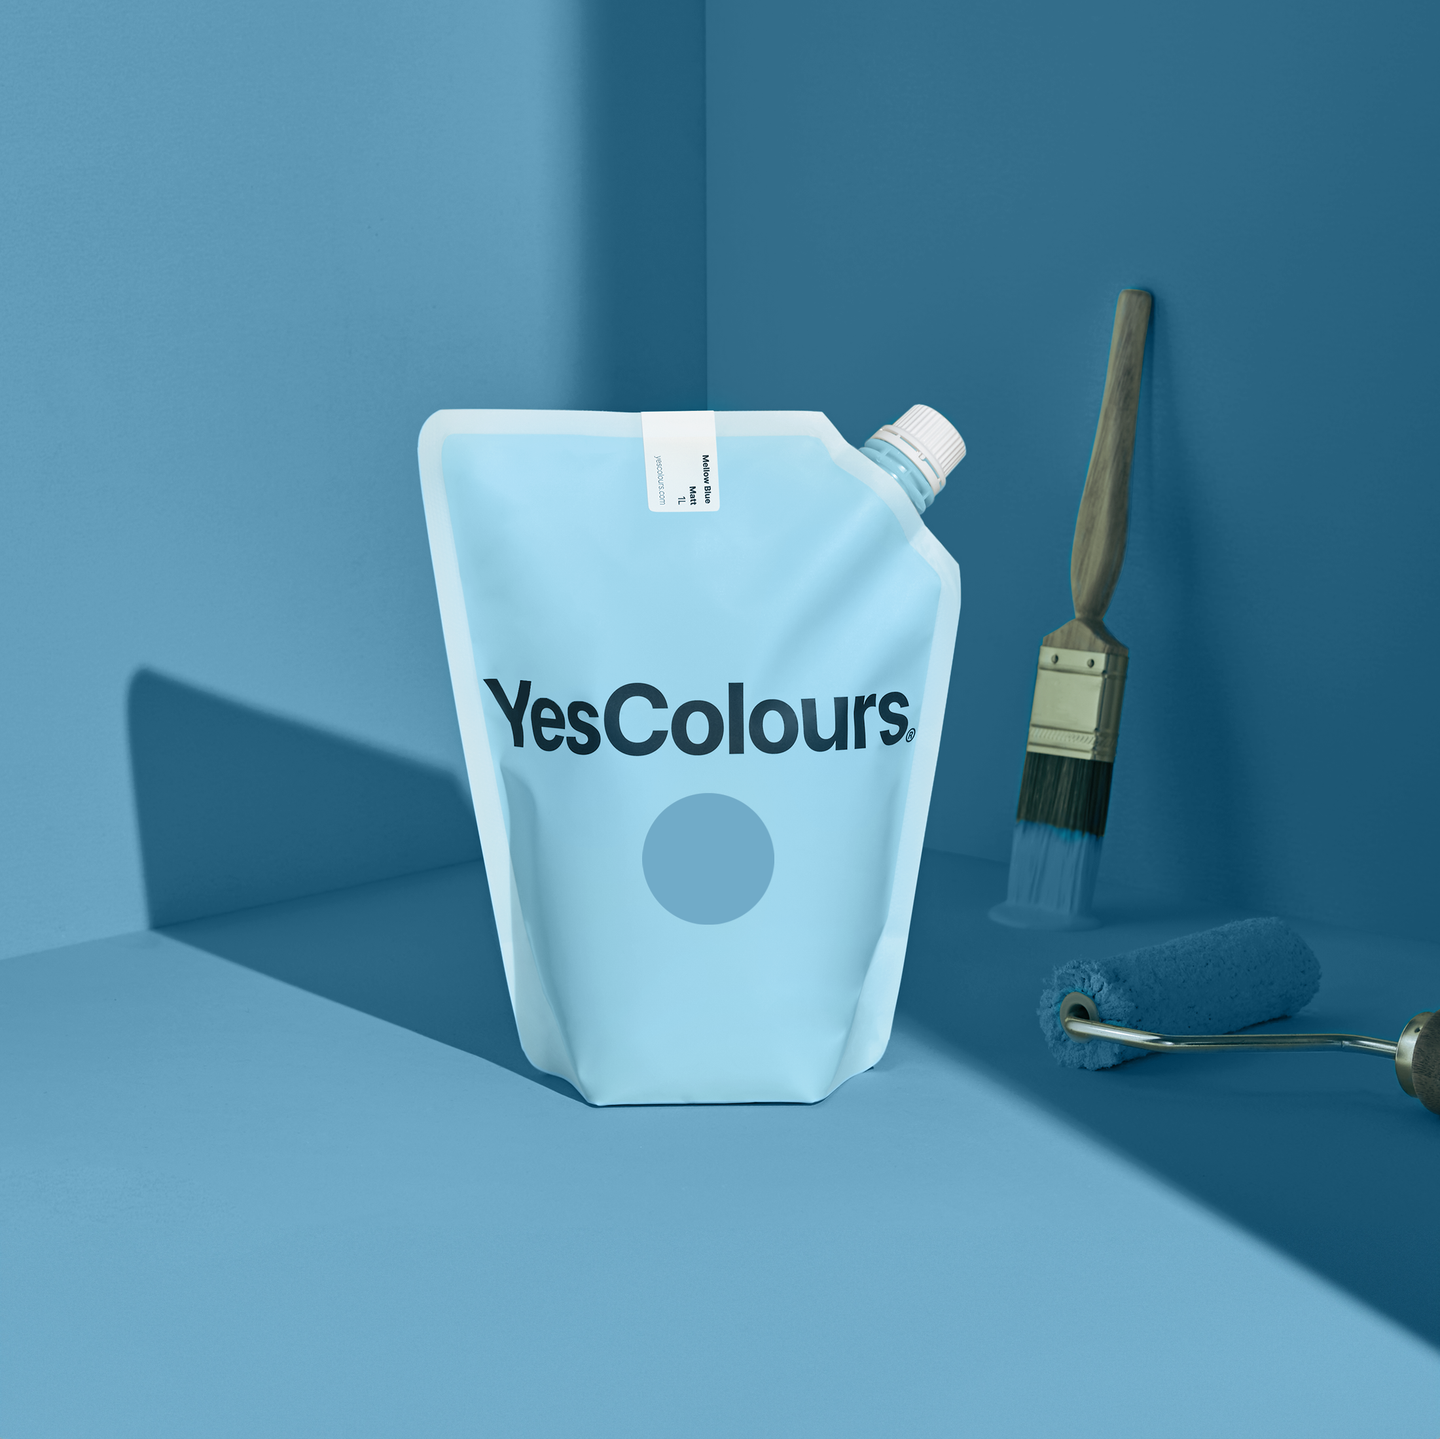 Glossy Paint Bucket Mockup - Free Download Images High Quality PNG, JPG